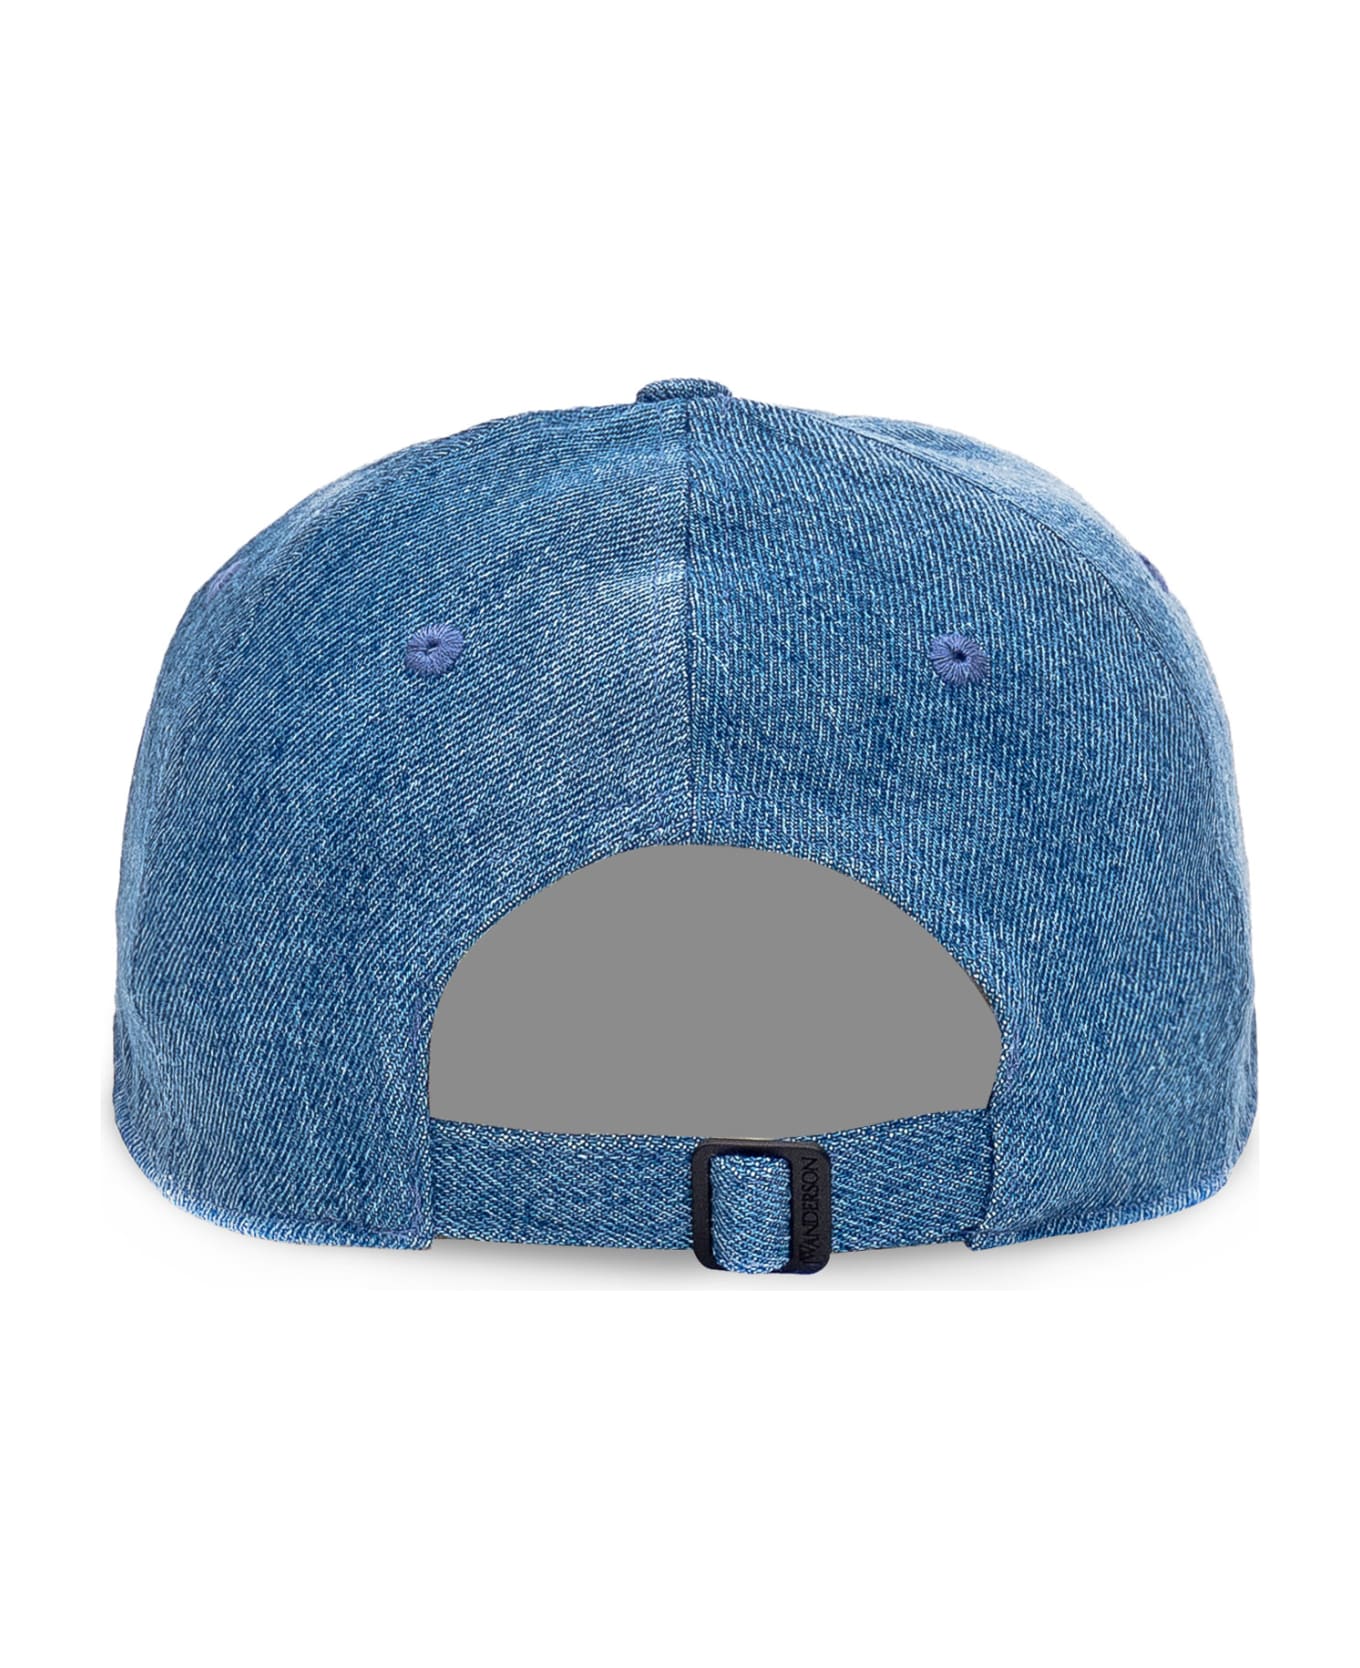 J.W. Anderson Logo Embroidered Baseball Cap - BLUE